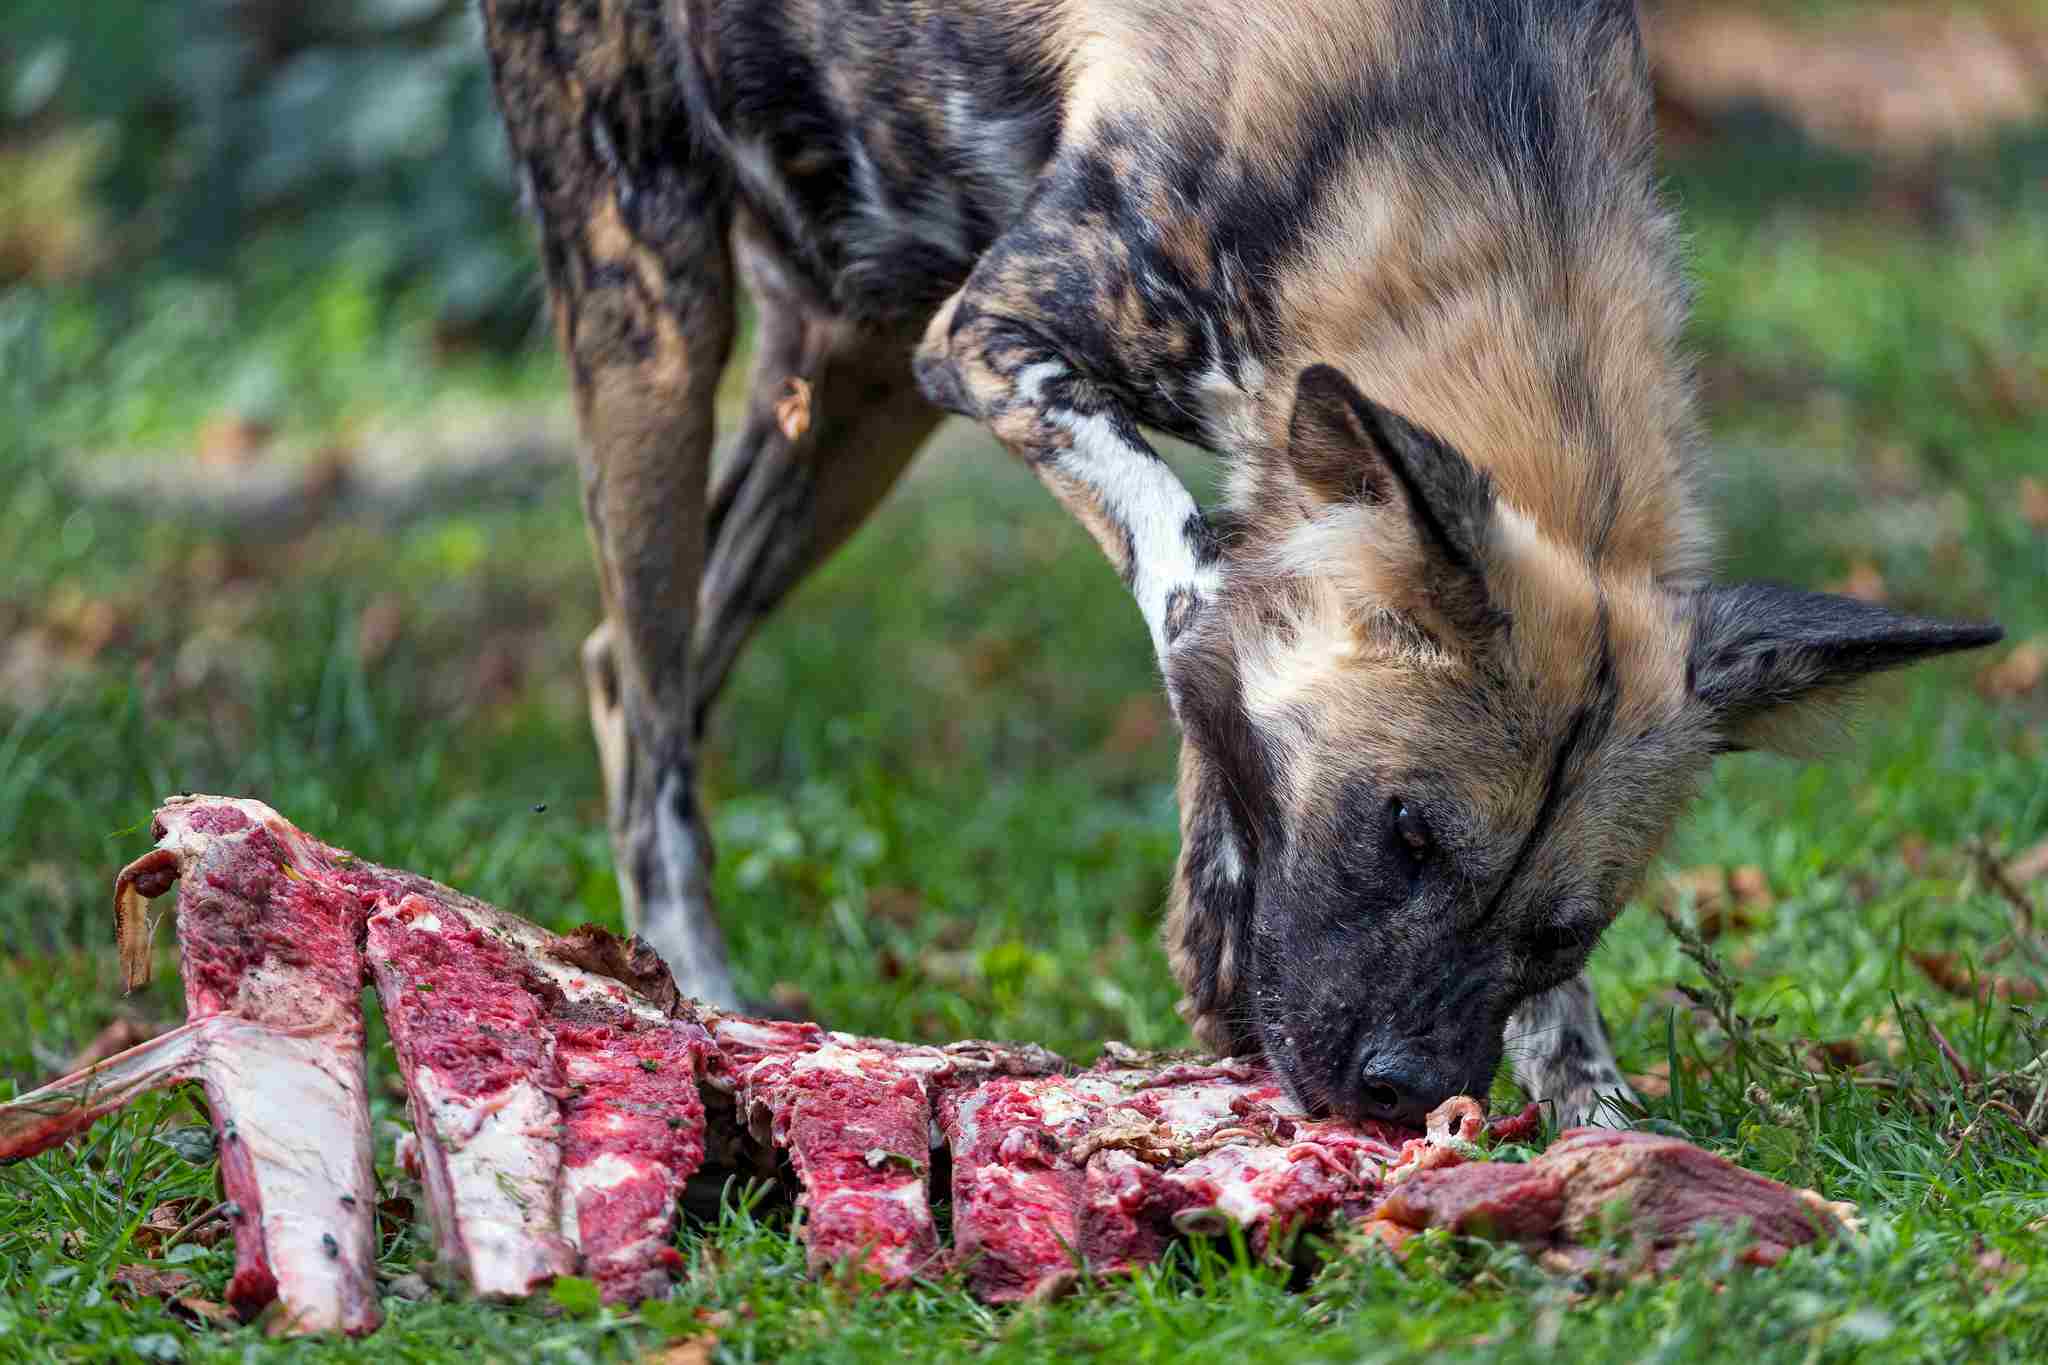 Is a Dog a Consumer: Some Relatives of the Domestic Dog, like African Wild Dogs, as Well as Feral Dogs, Have Carnivorous Characteristics (Credit: Tambako The Jaguar 2018, Uploaded Online 2019 .CC BY-ND 2.0.)